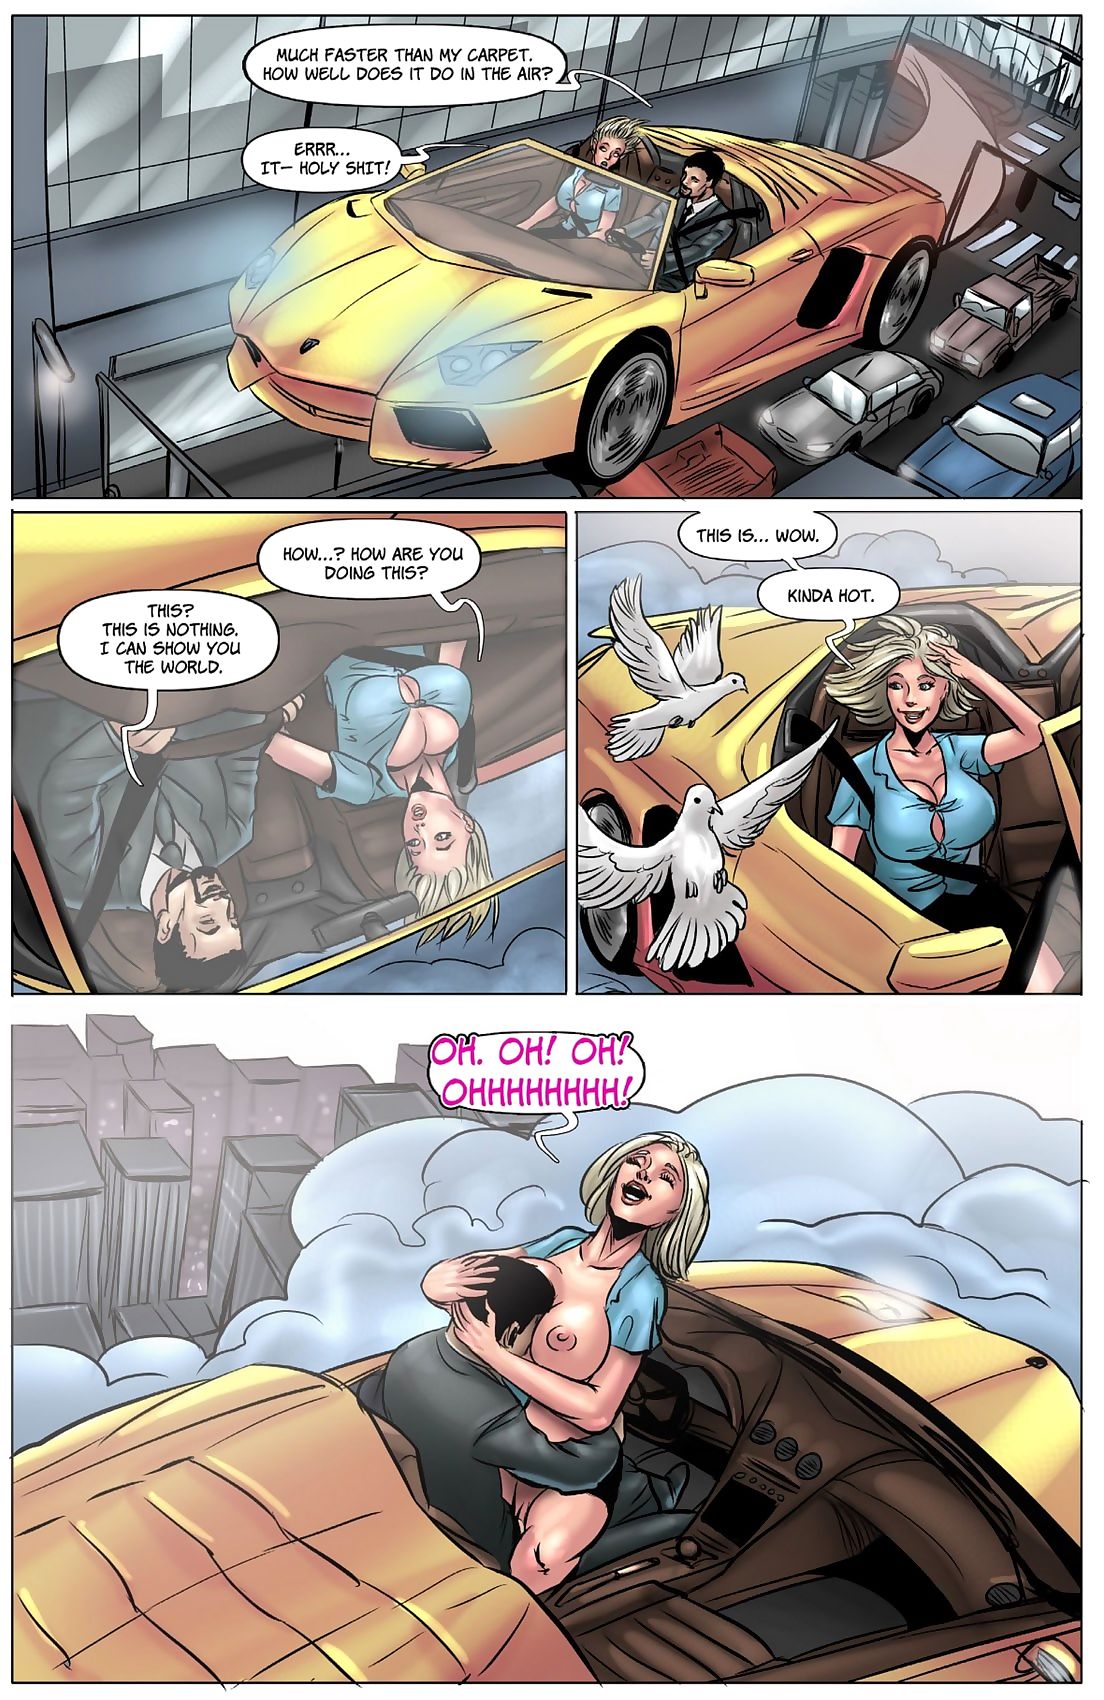 Bot- The Three Wish War Issue 3 page 1